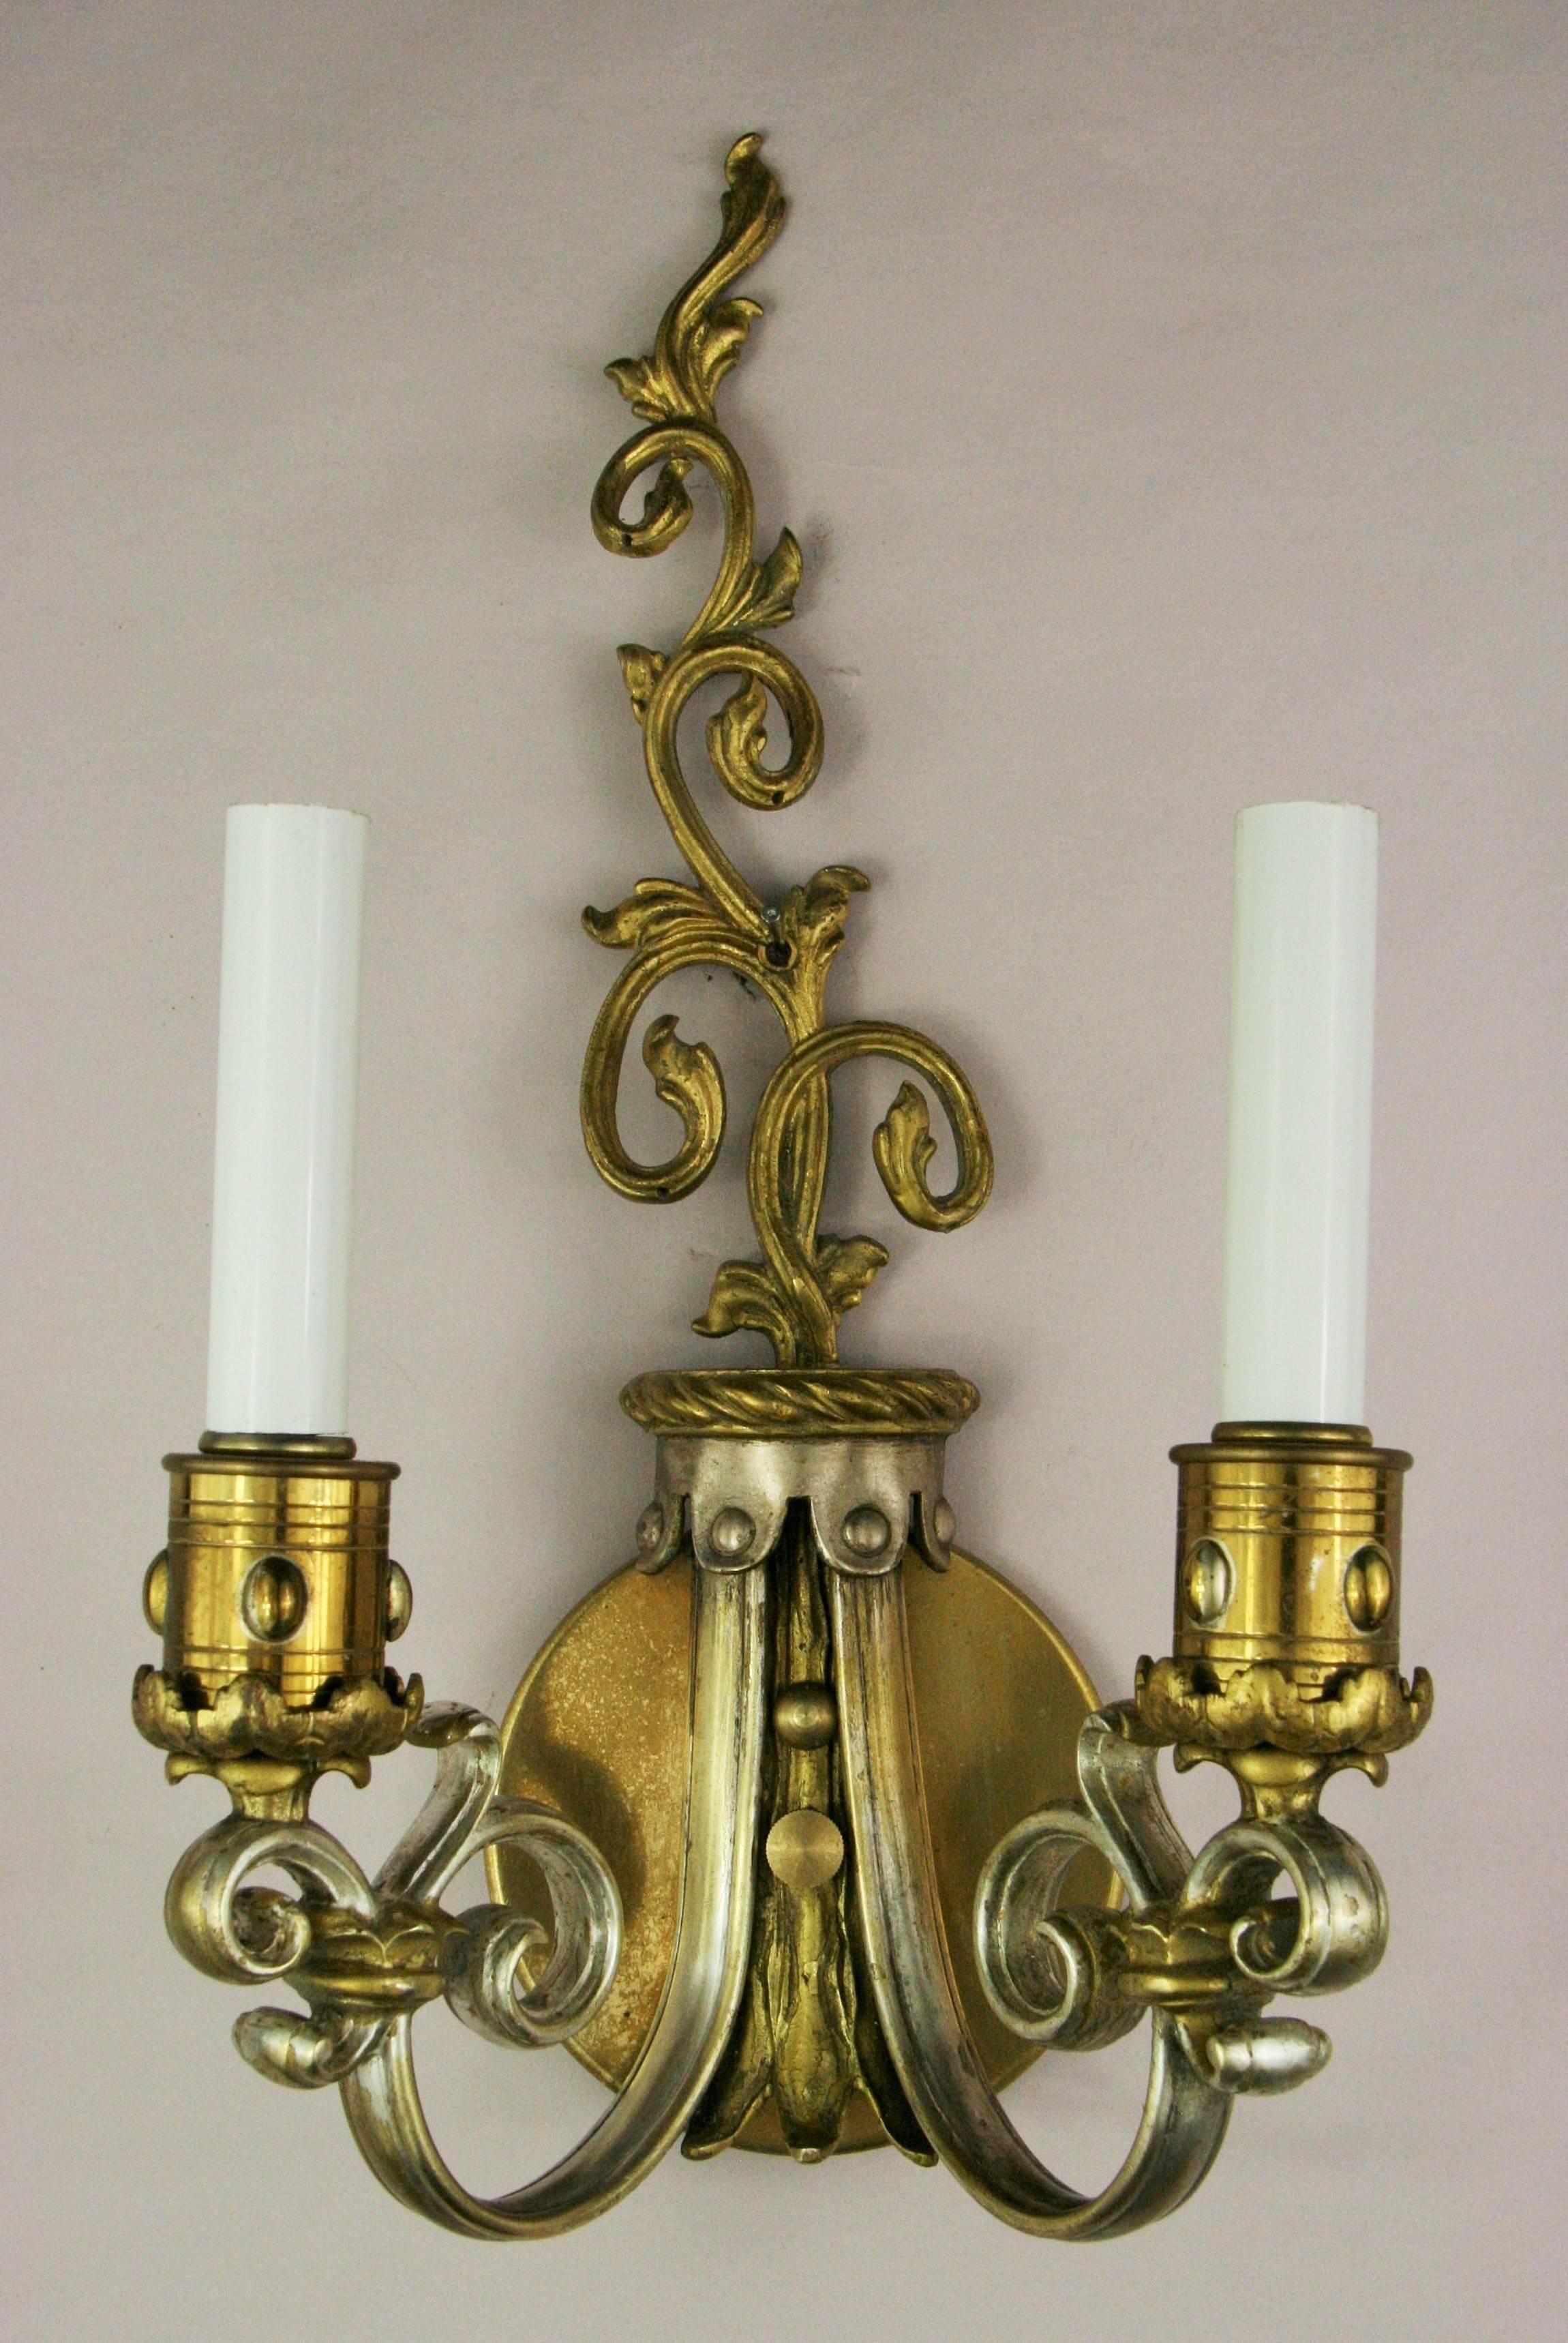 Pair of French sconces 
Takes two 60 watt candelabra based bulbs
Newly rewired.
No additional discounts